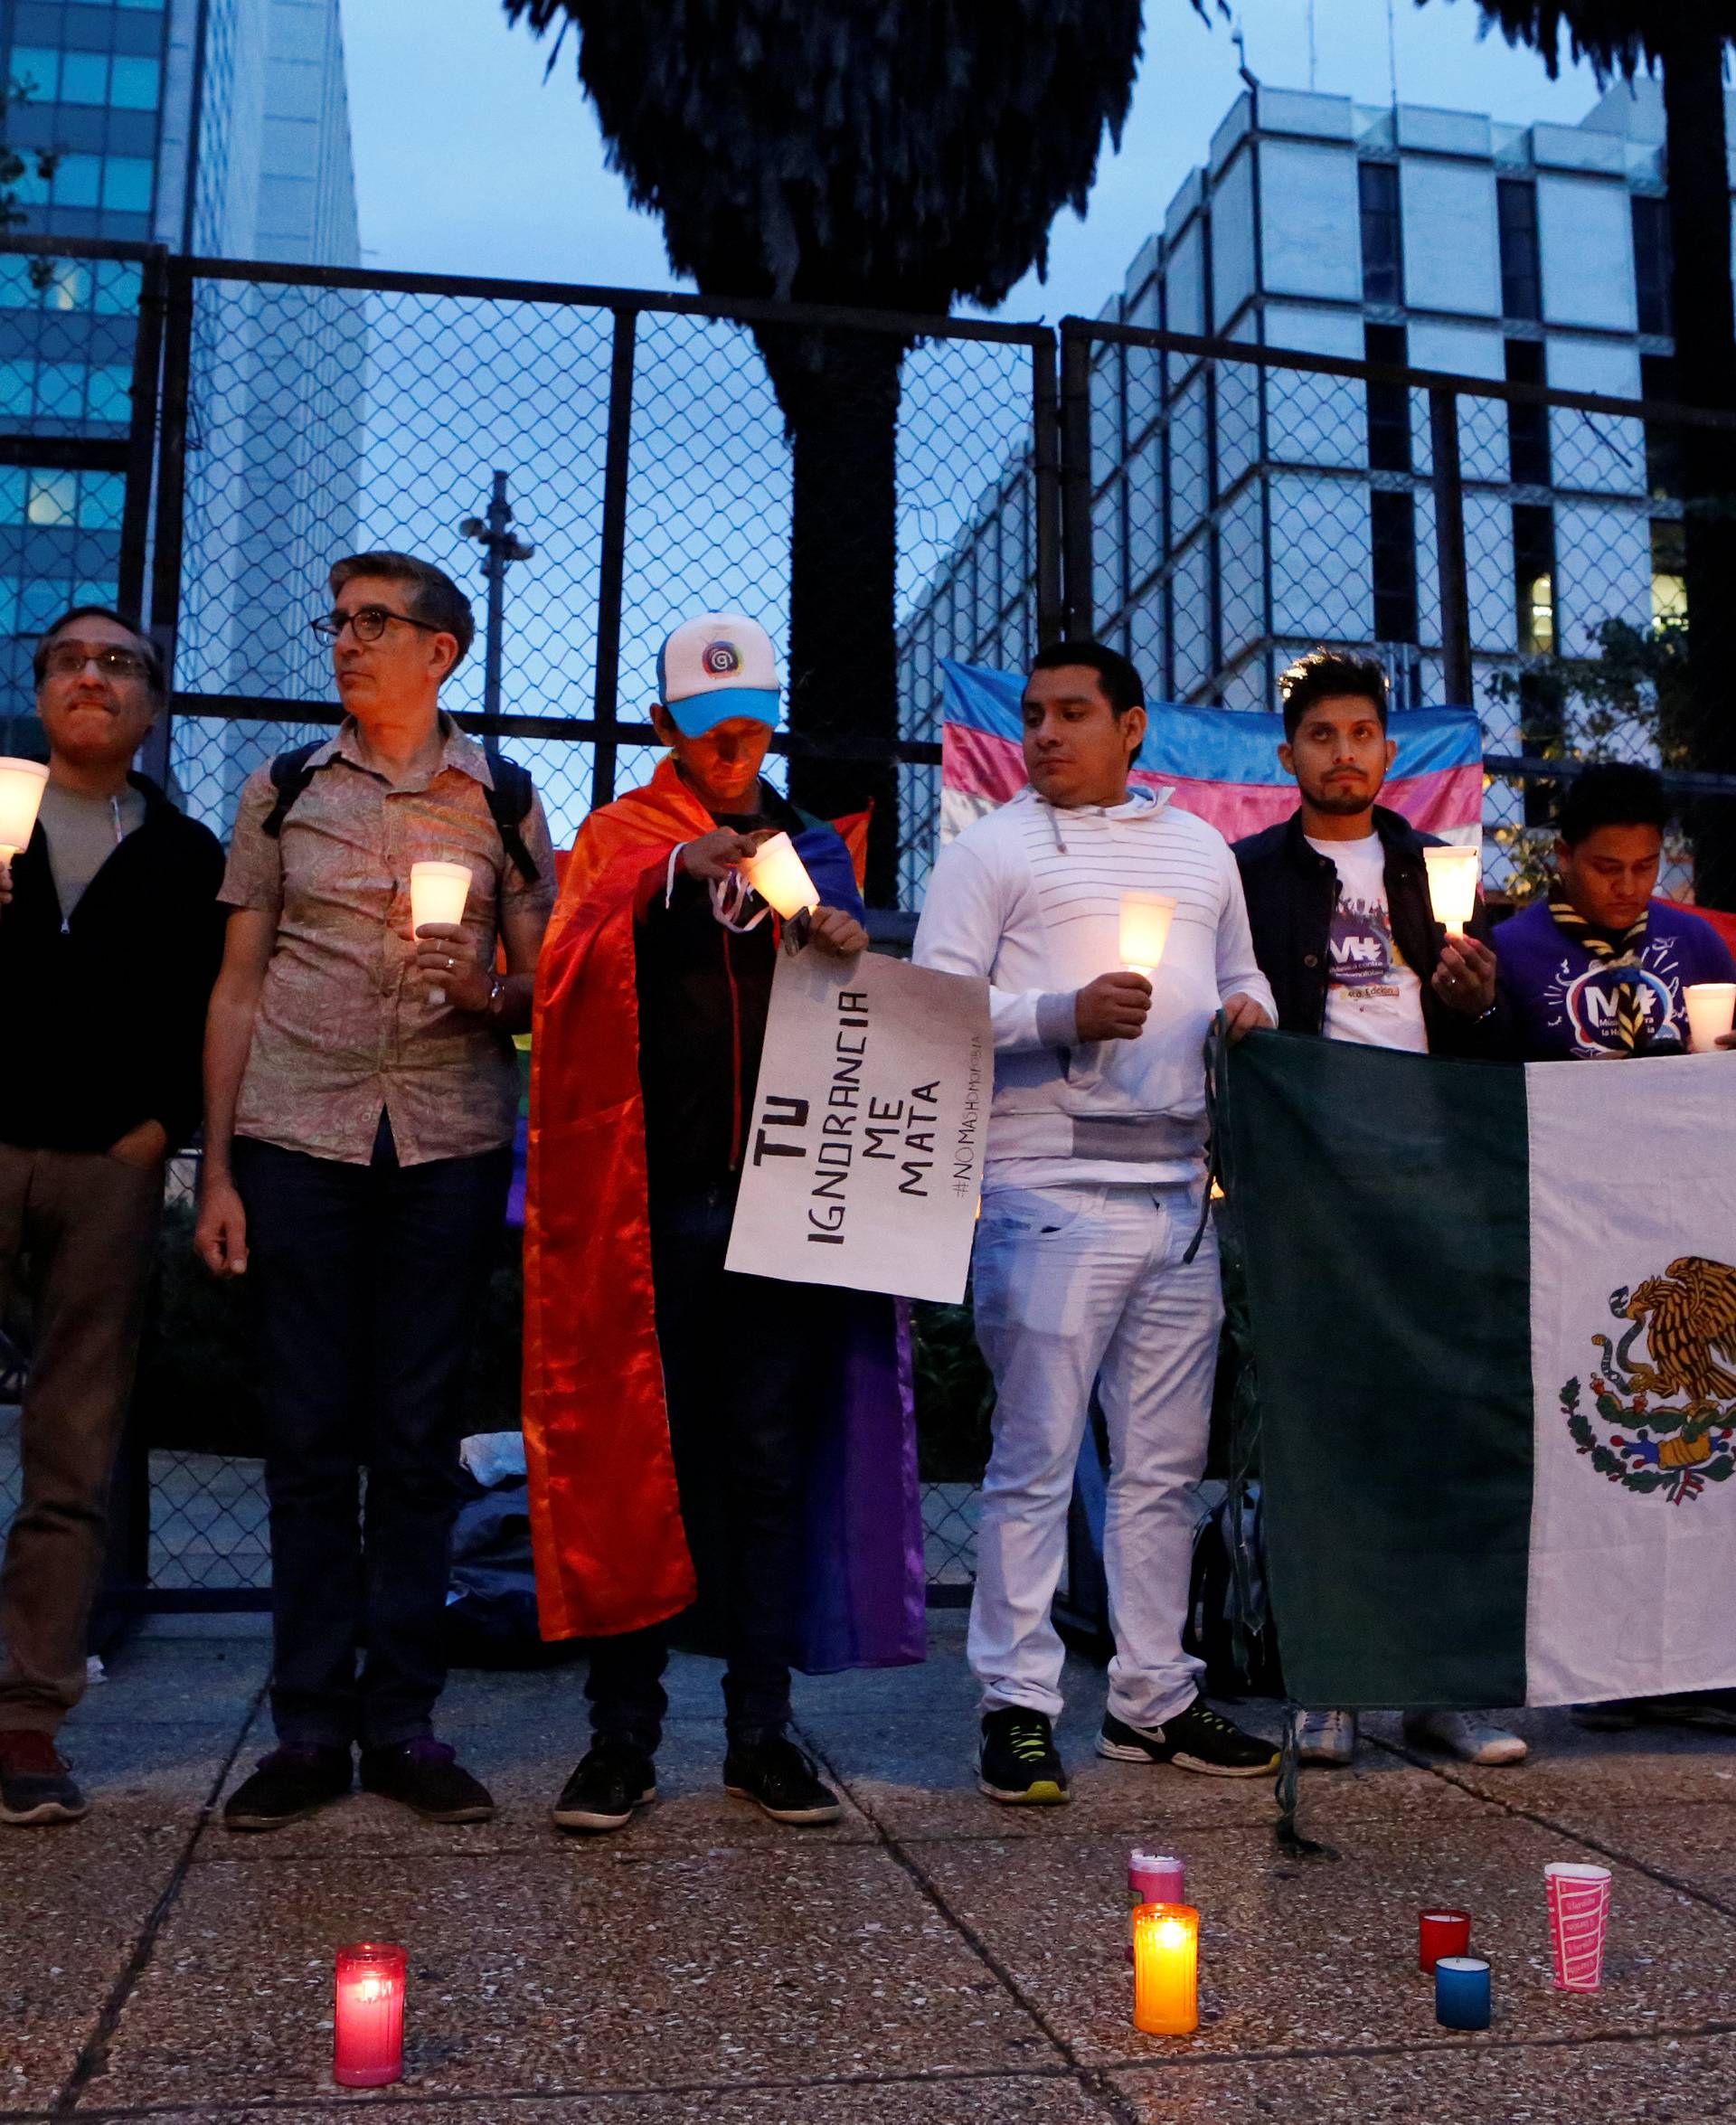 Members of the LGBT community take part in a vigil for the victims of a mass shooting at a gay nightclub in Orlando, Florida, outside the U.S. embassy in Mexico City